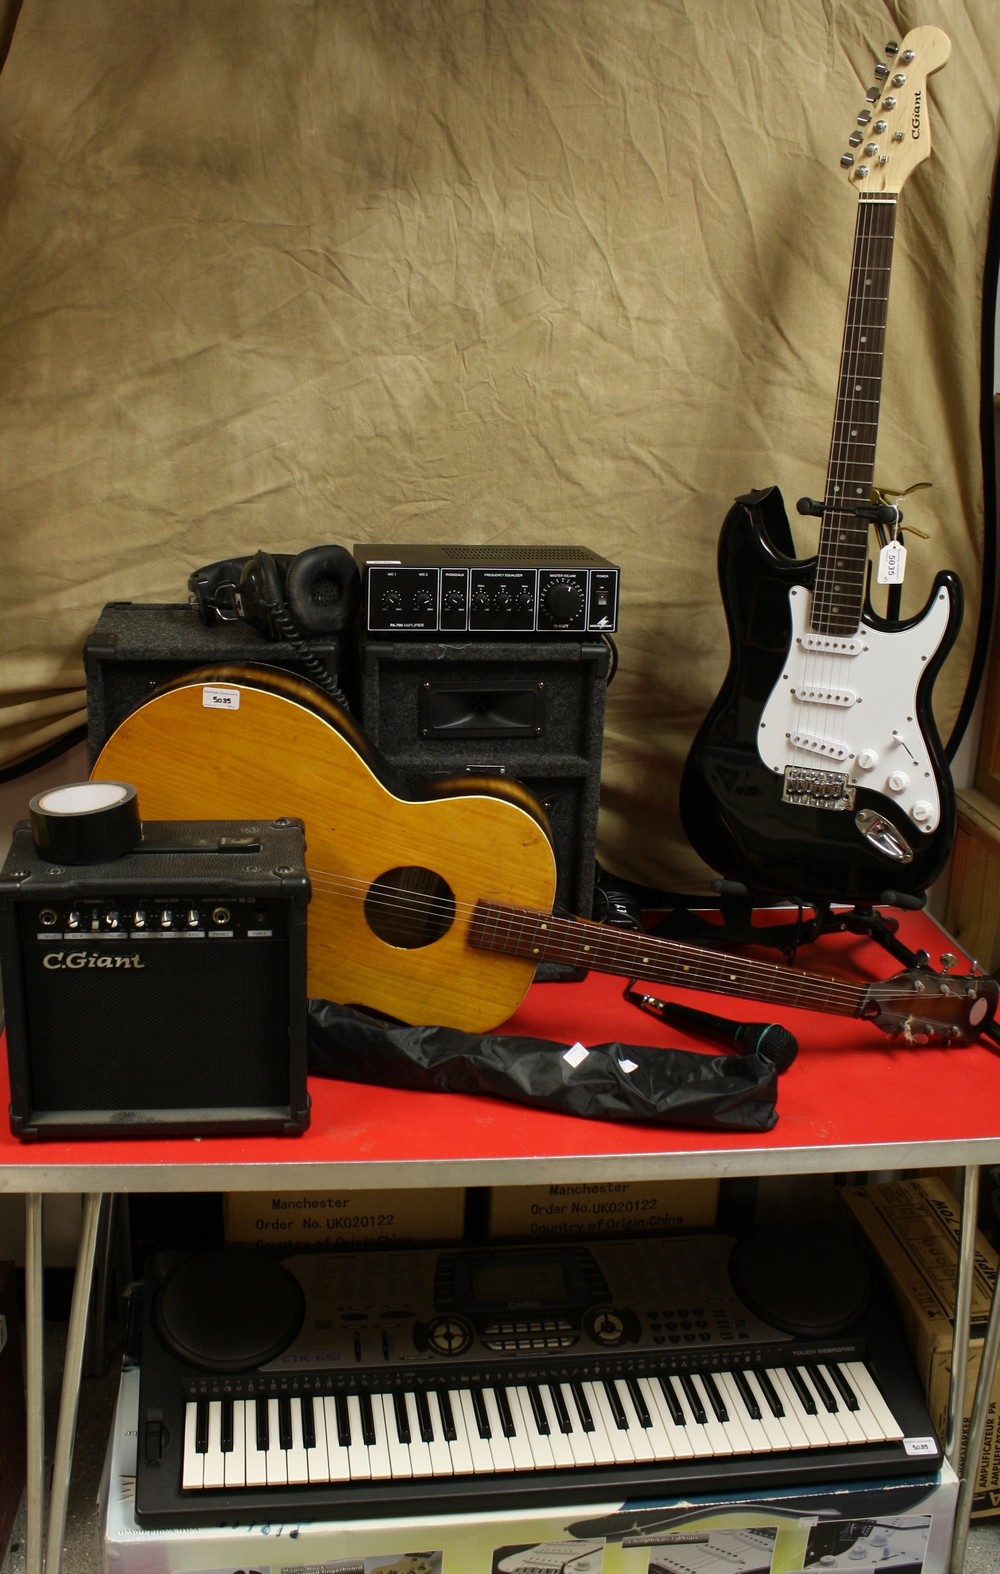 Musical Instruments - a C-Giant electric guitar and amplifier; an acoustic guitar; a Casio keyboard,